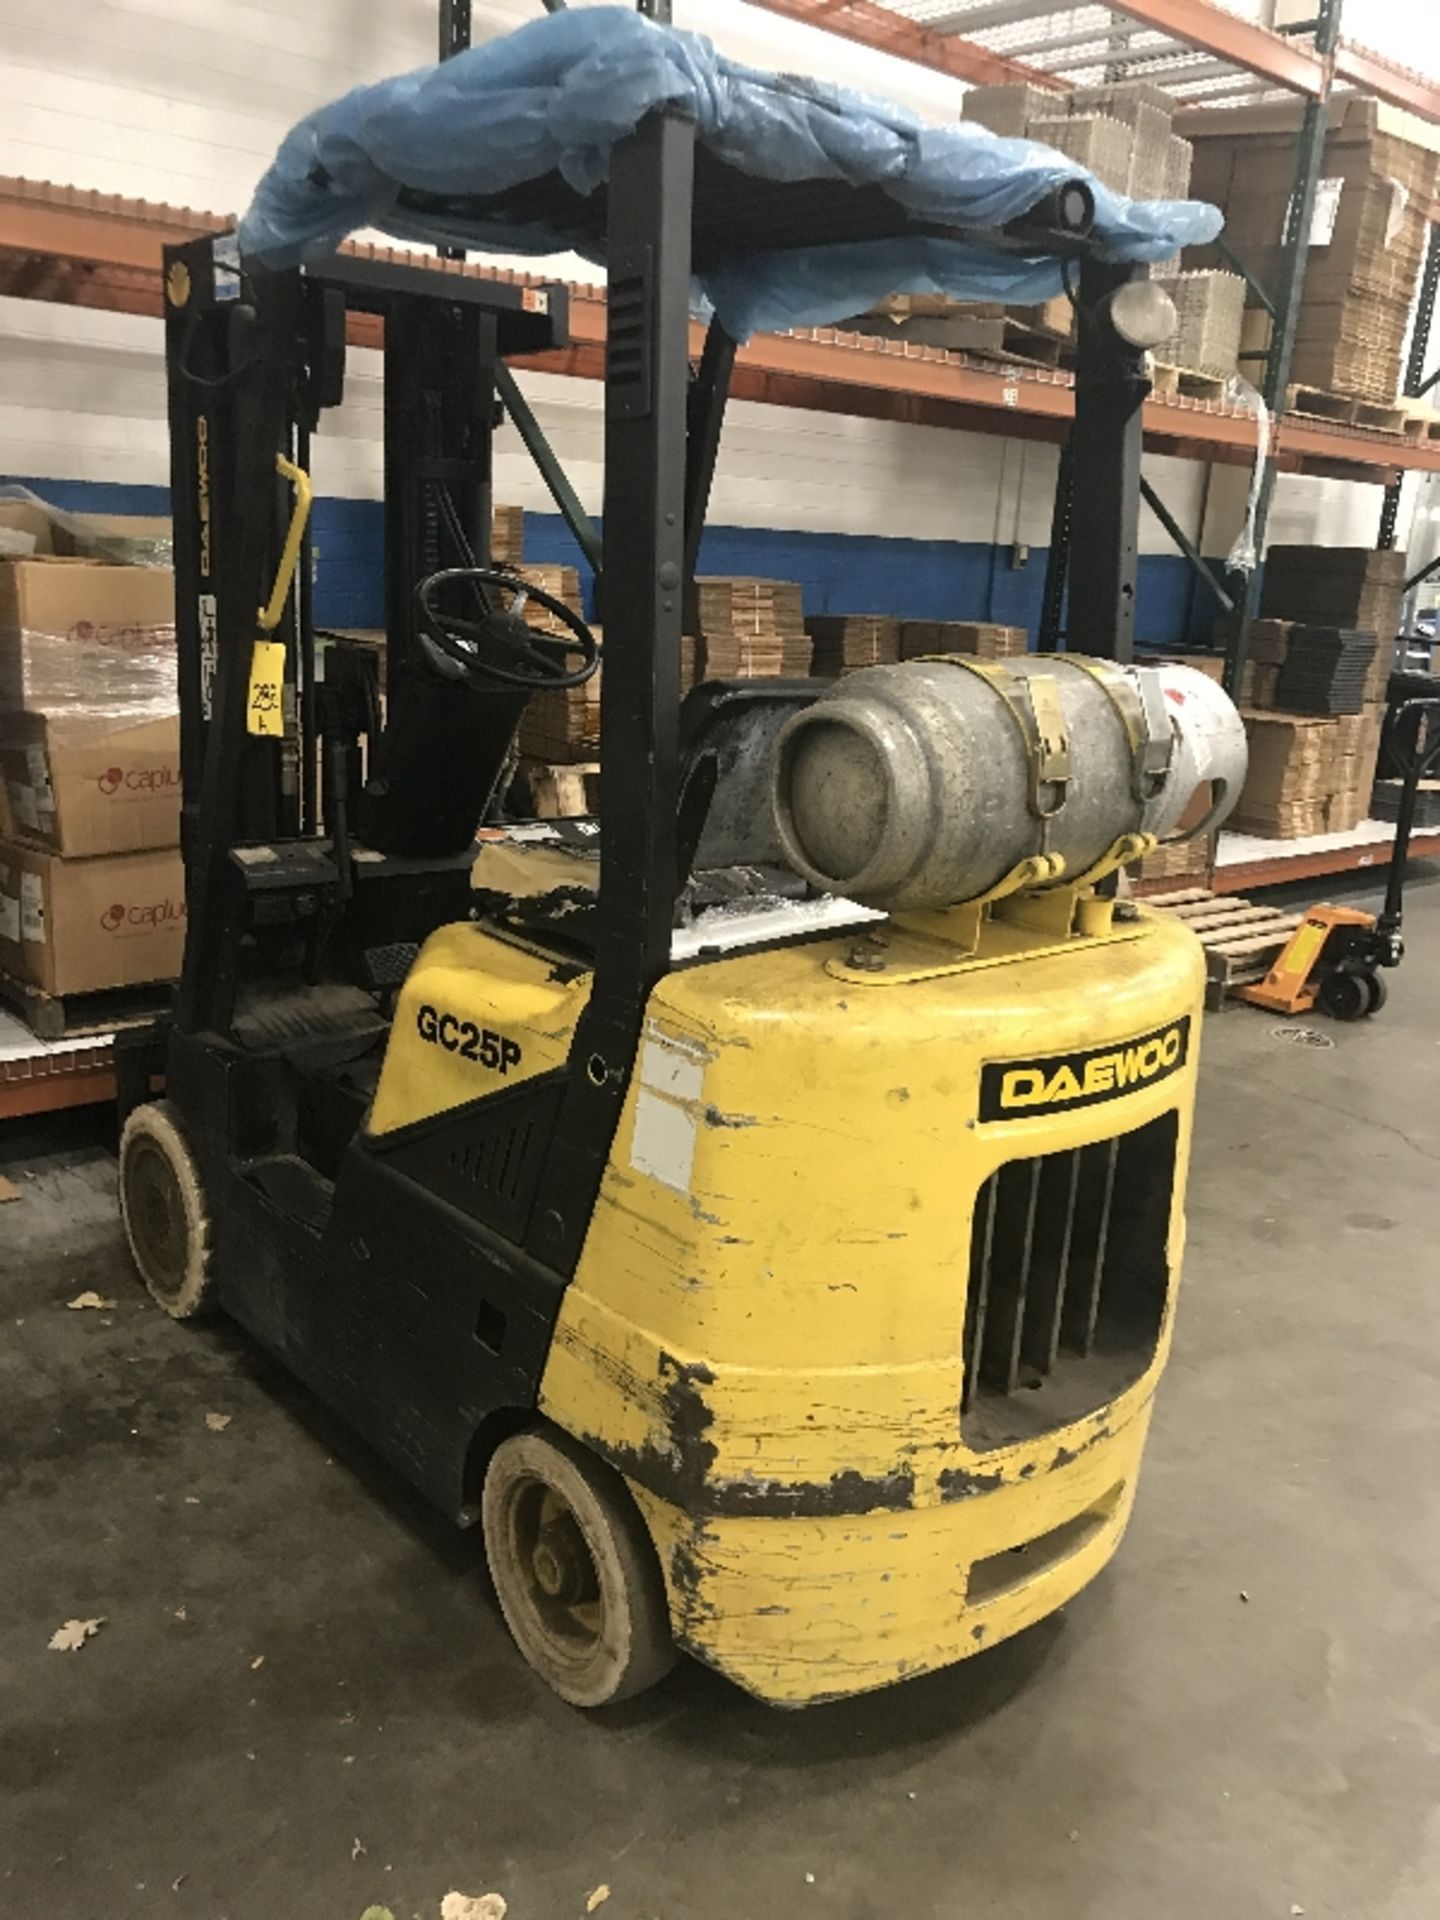 Daewoo Forklift, Model: GC25P-3, S/N: E1-00119_x00D_ Not available for pick up until 11/15/17 - Image 4 of 4